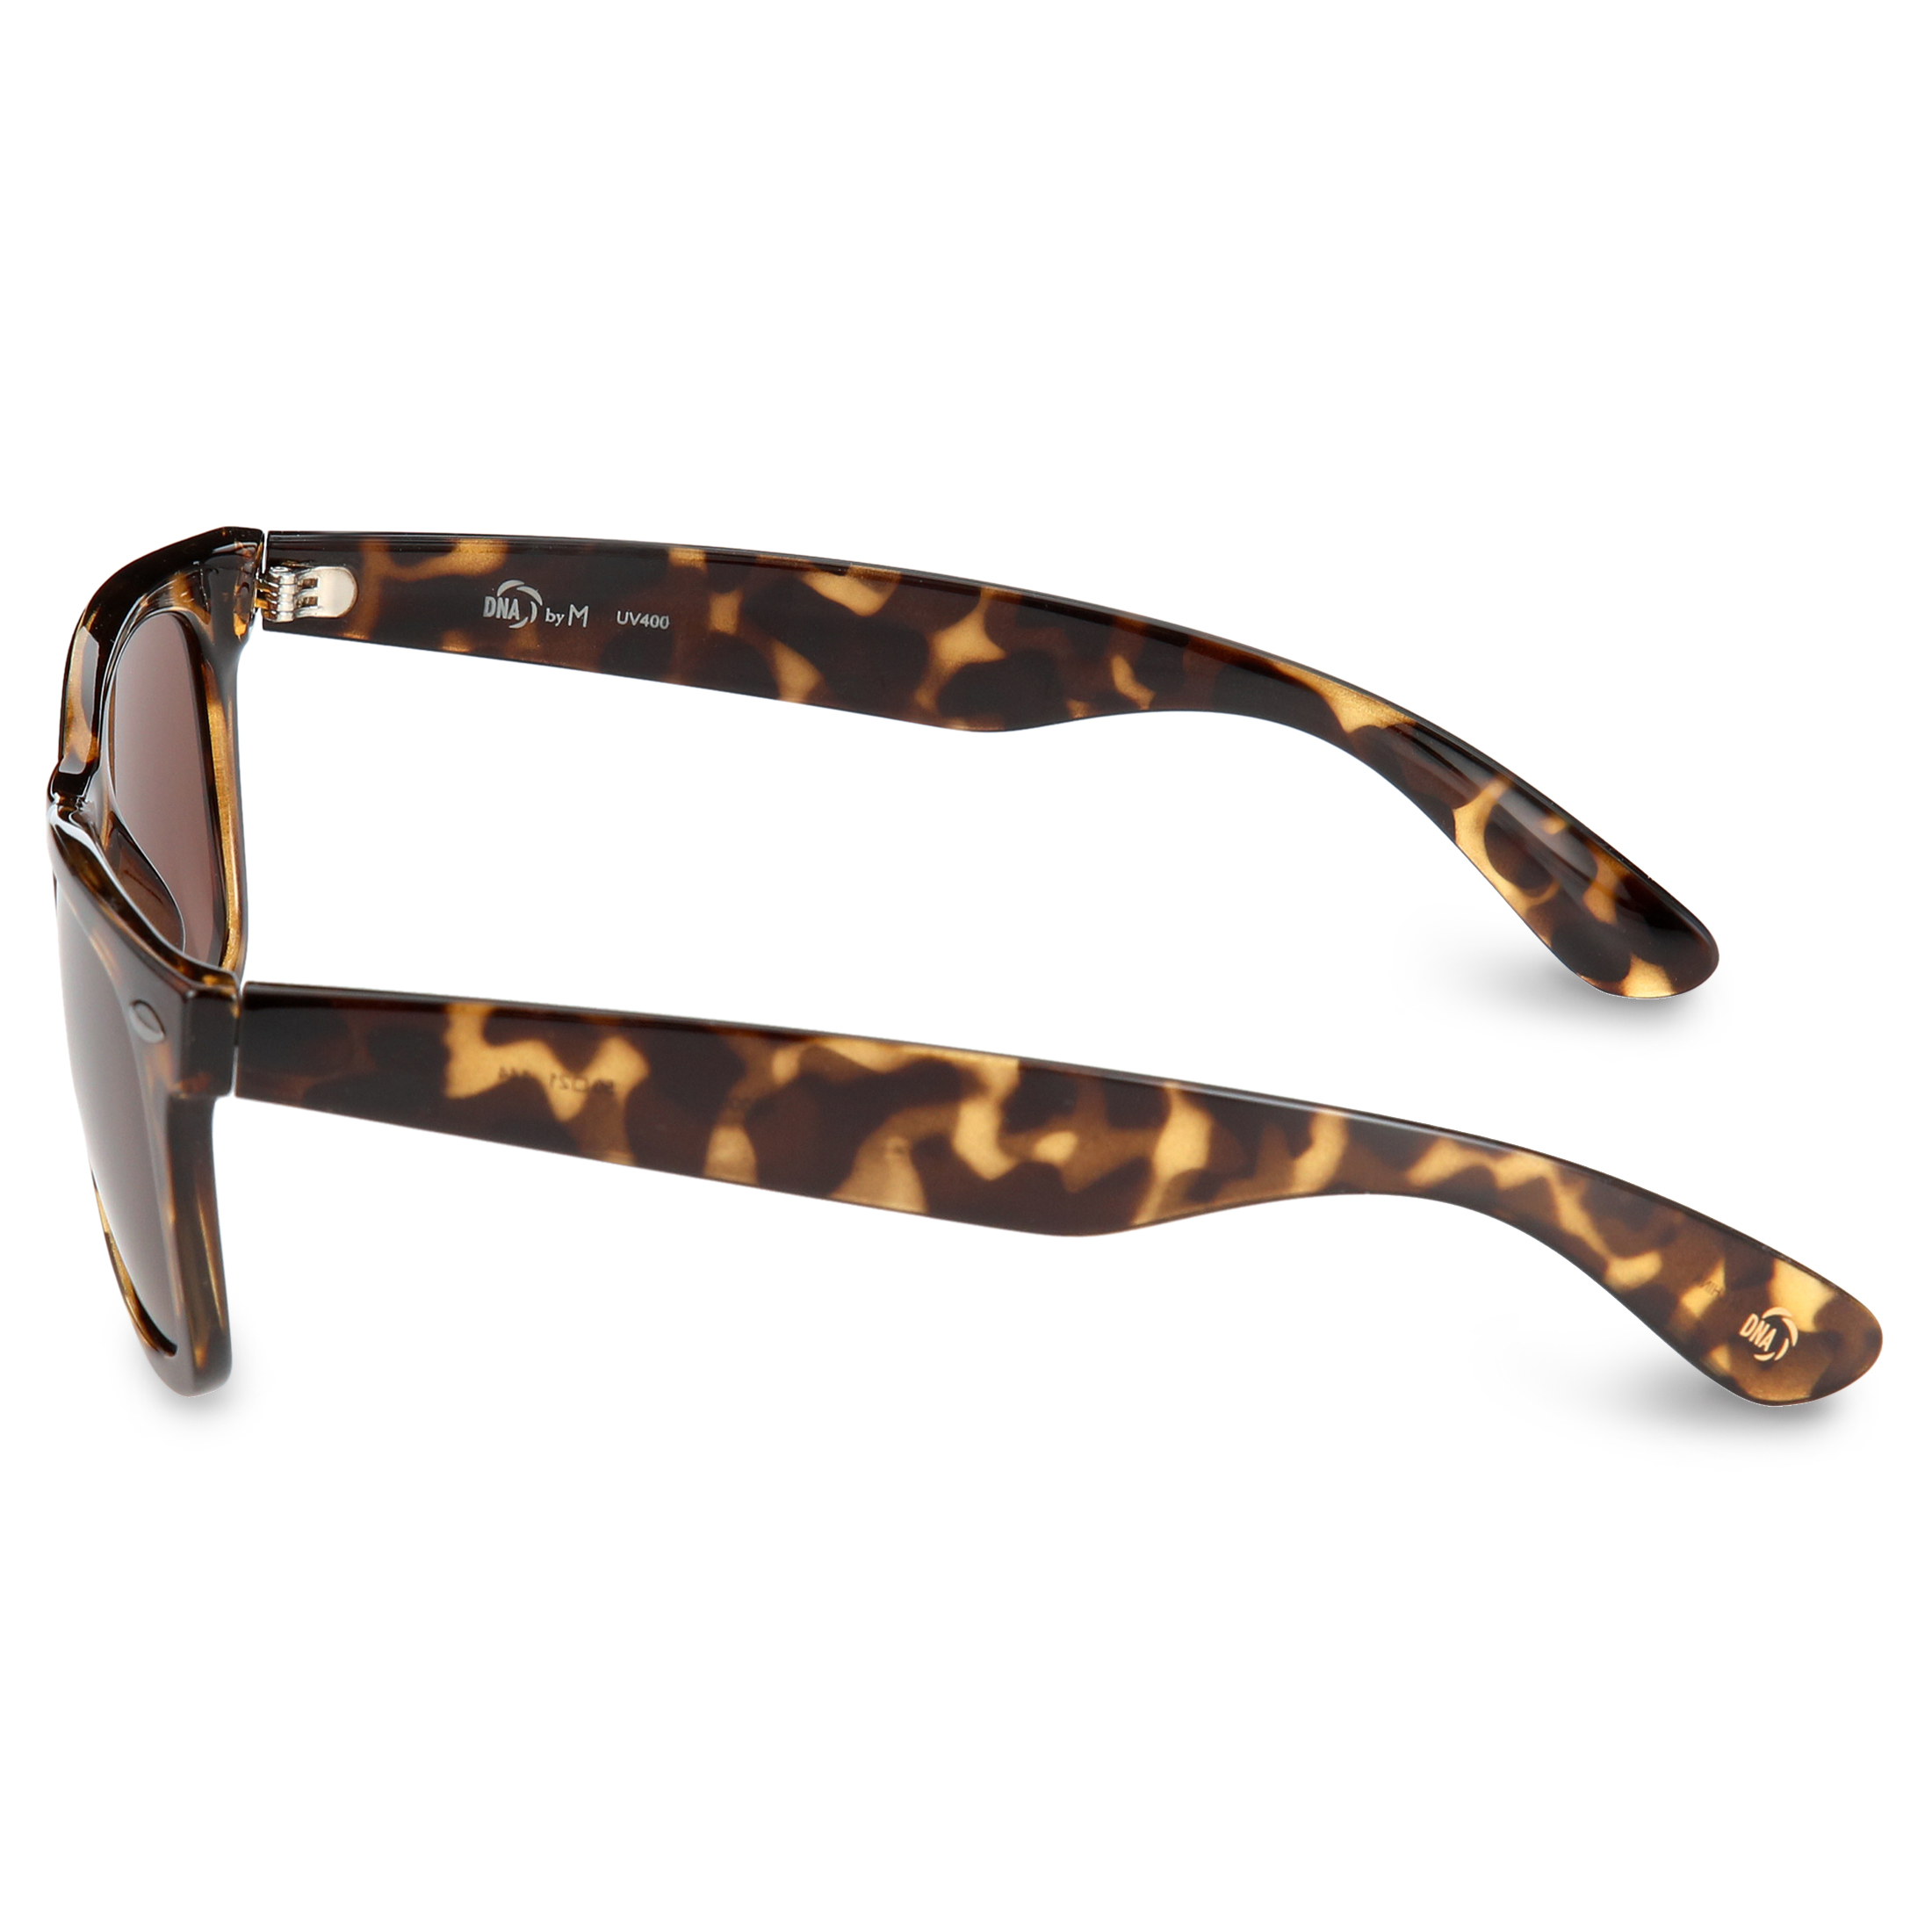 DNA Womens Rx'able Sunglasses, A2008, Tortoise, 50-21-148 - image 4 of 6